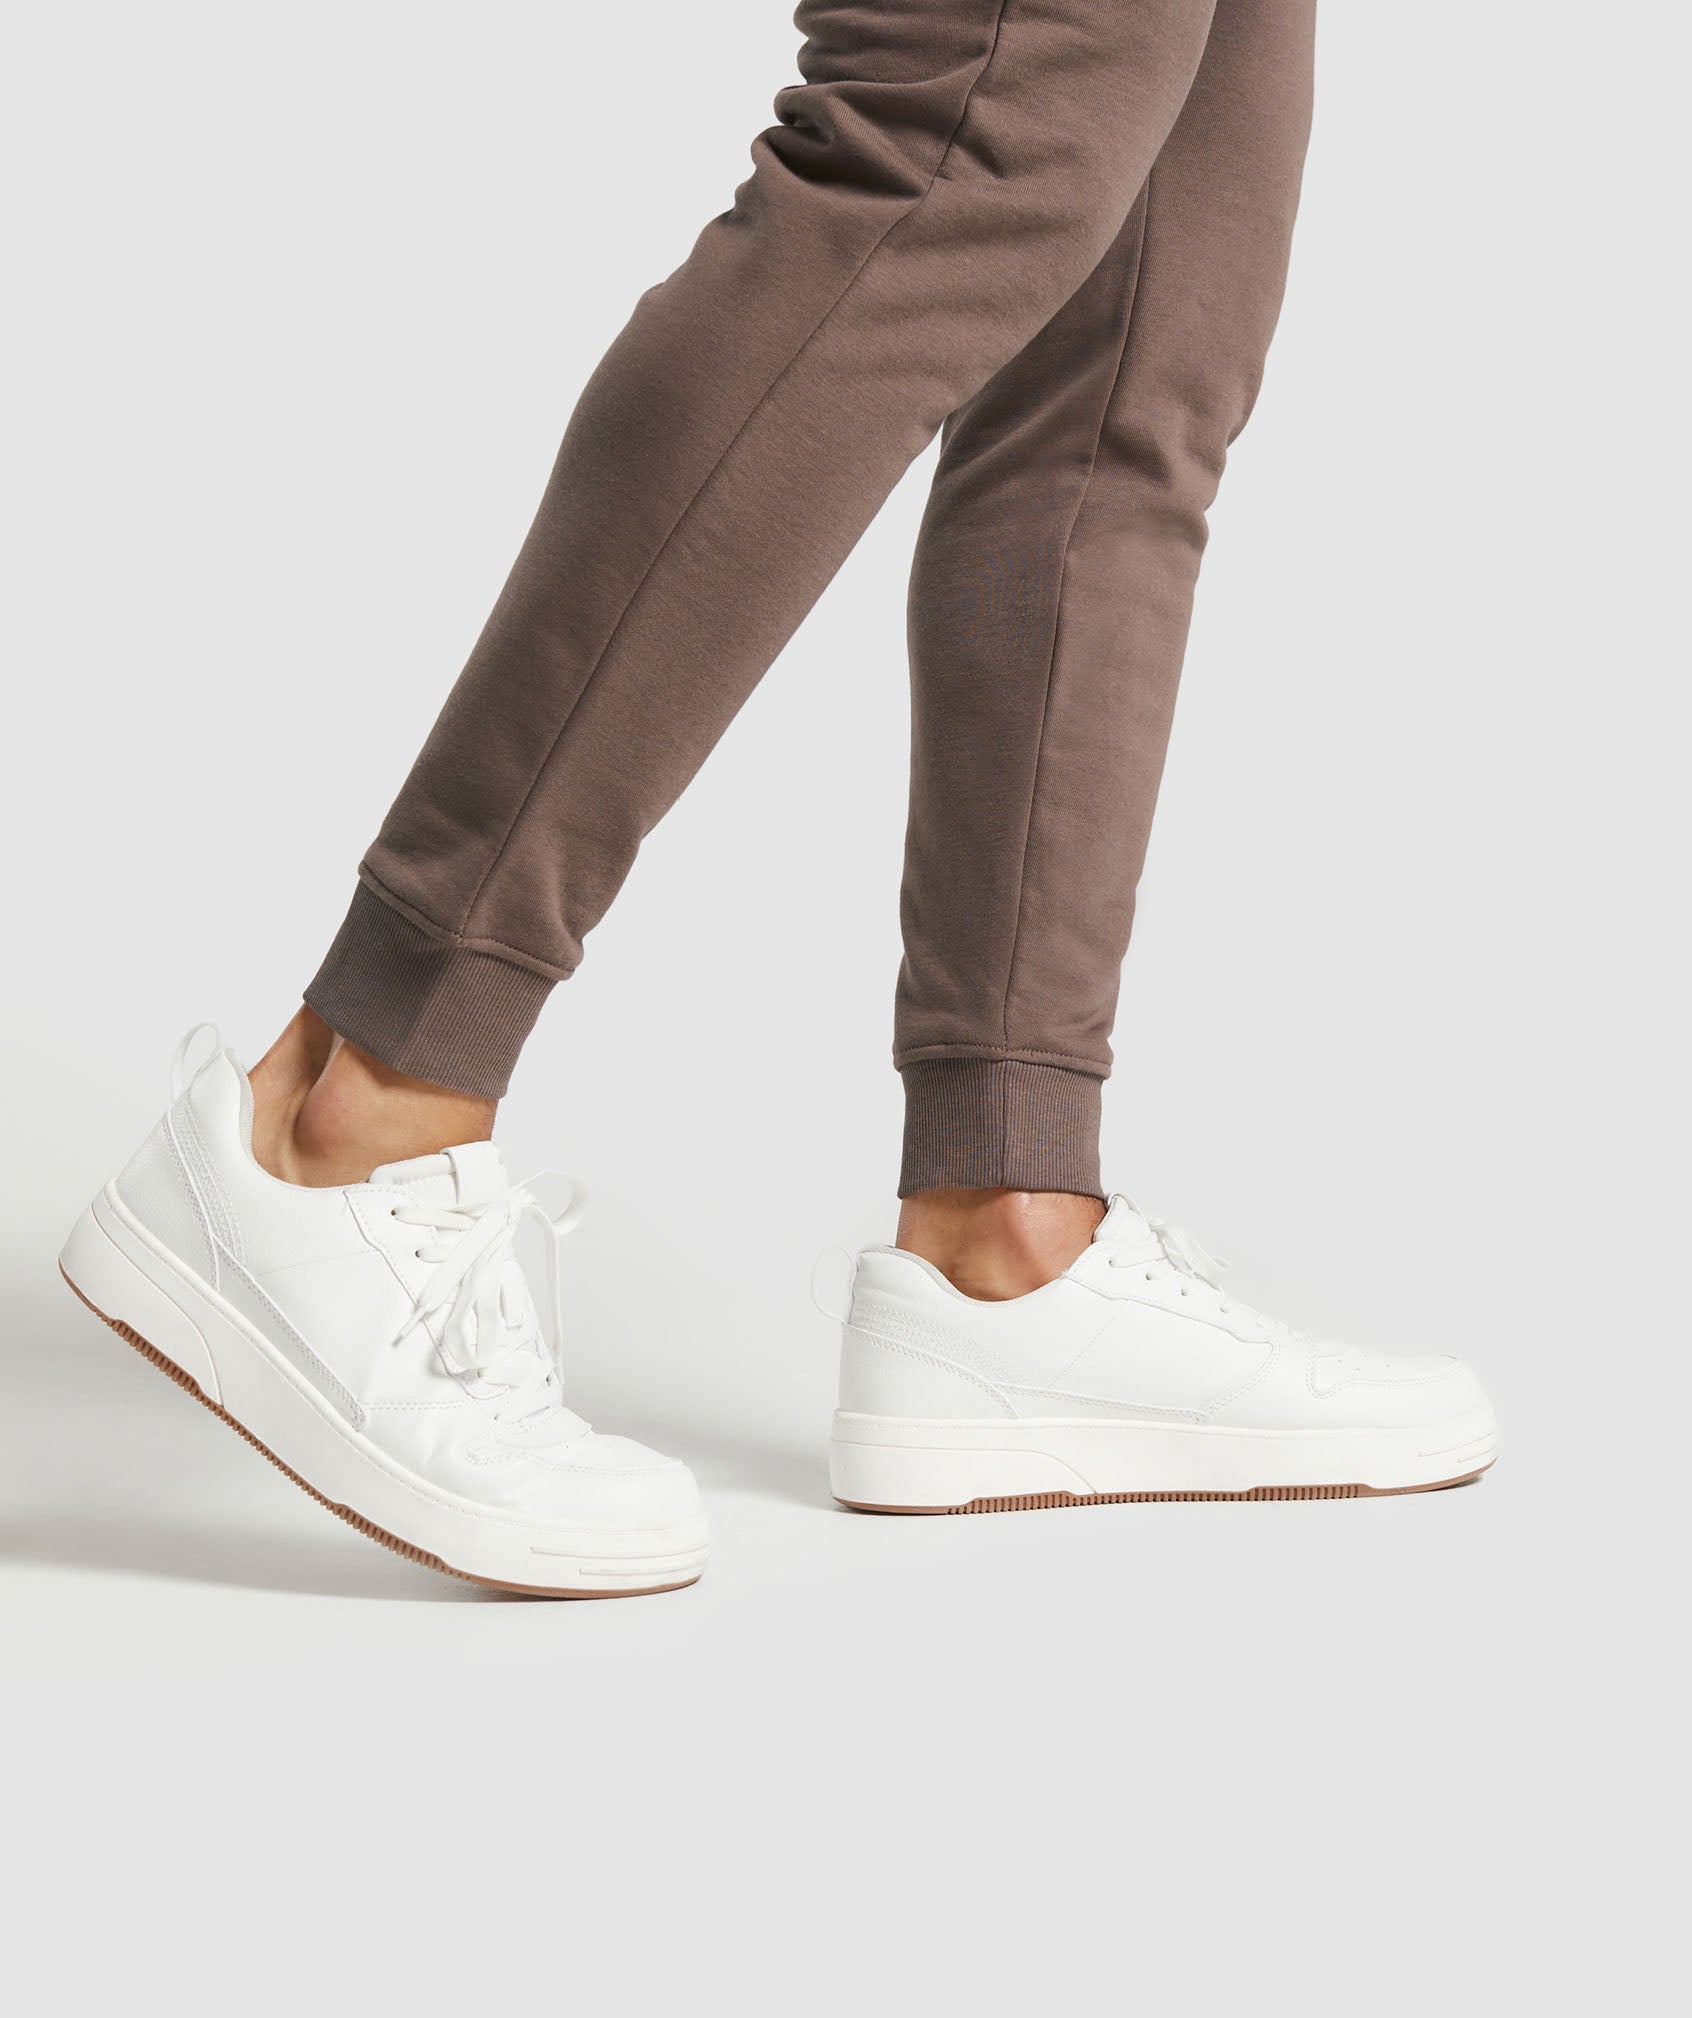 Crest Joggers in Truffle Brown - view 6